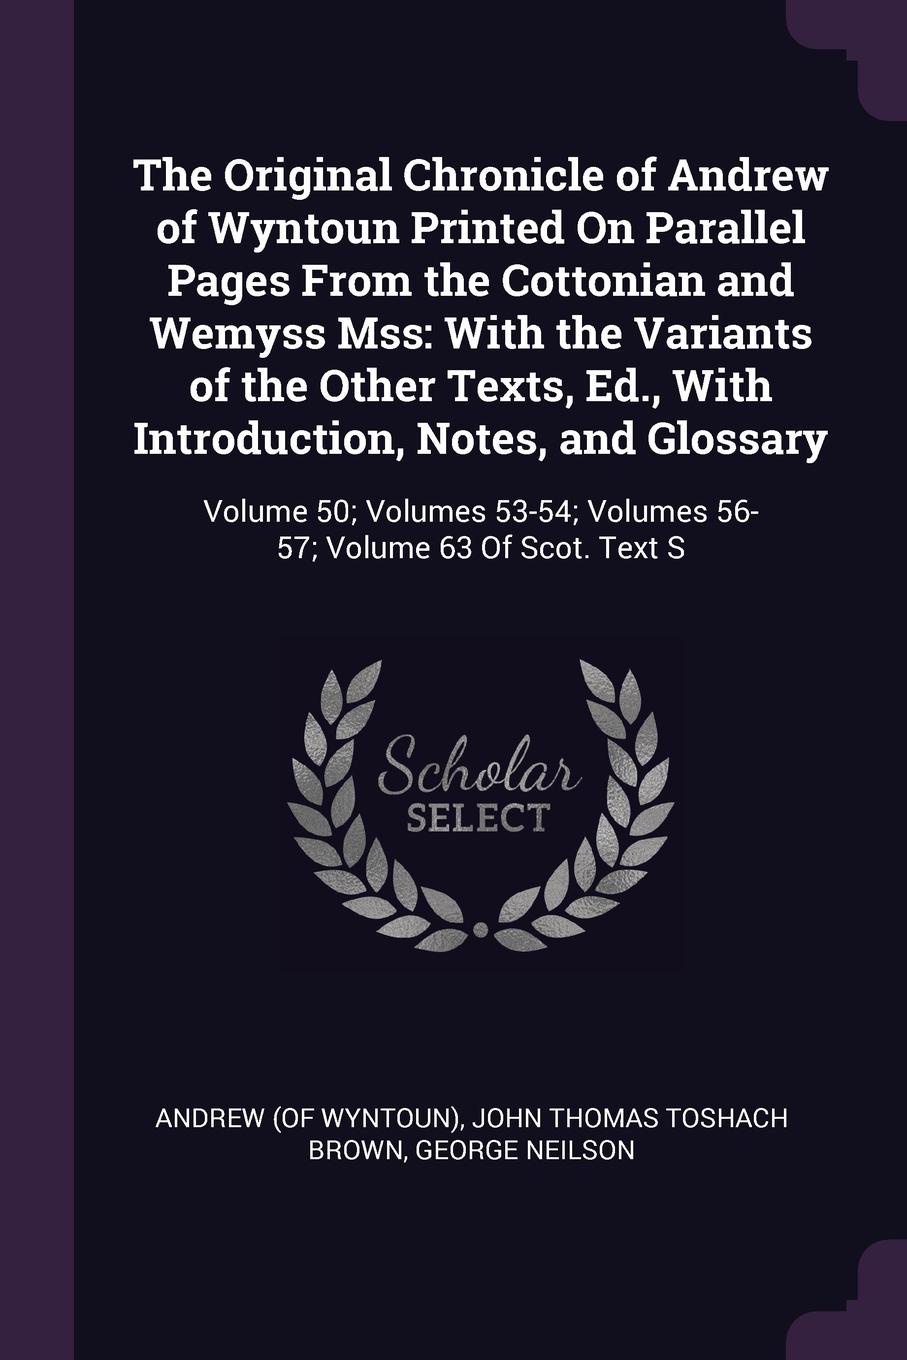 The Original Chronicle of Andrew of Wyntoun Printed On Parallel Pages From the Cottonian and Wemyss Mss. With the Variants of the Other Texts, Ed., With Introduction, Notes, and Glossary: Volume 50; Volumes 53-54; Volumes 56-57; Volume 63 Of Scot....